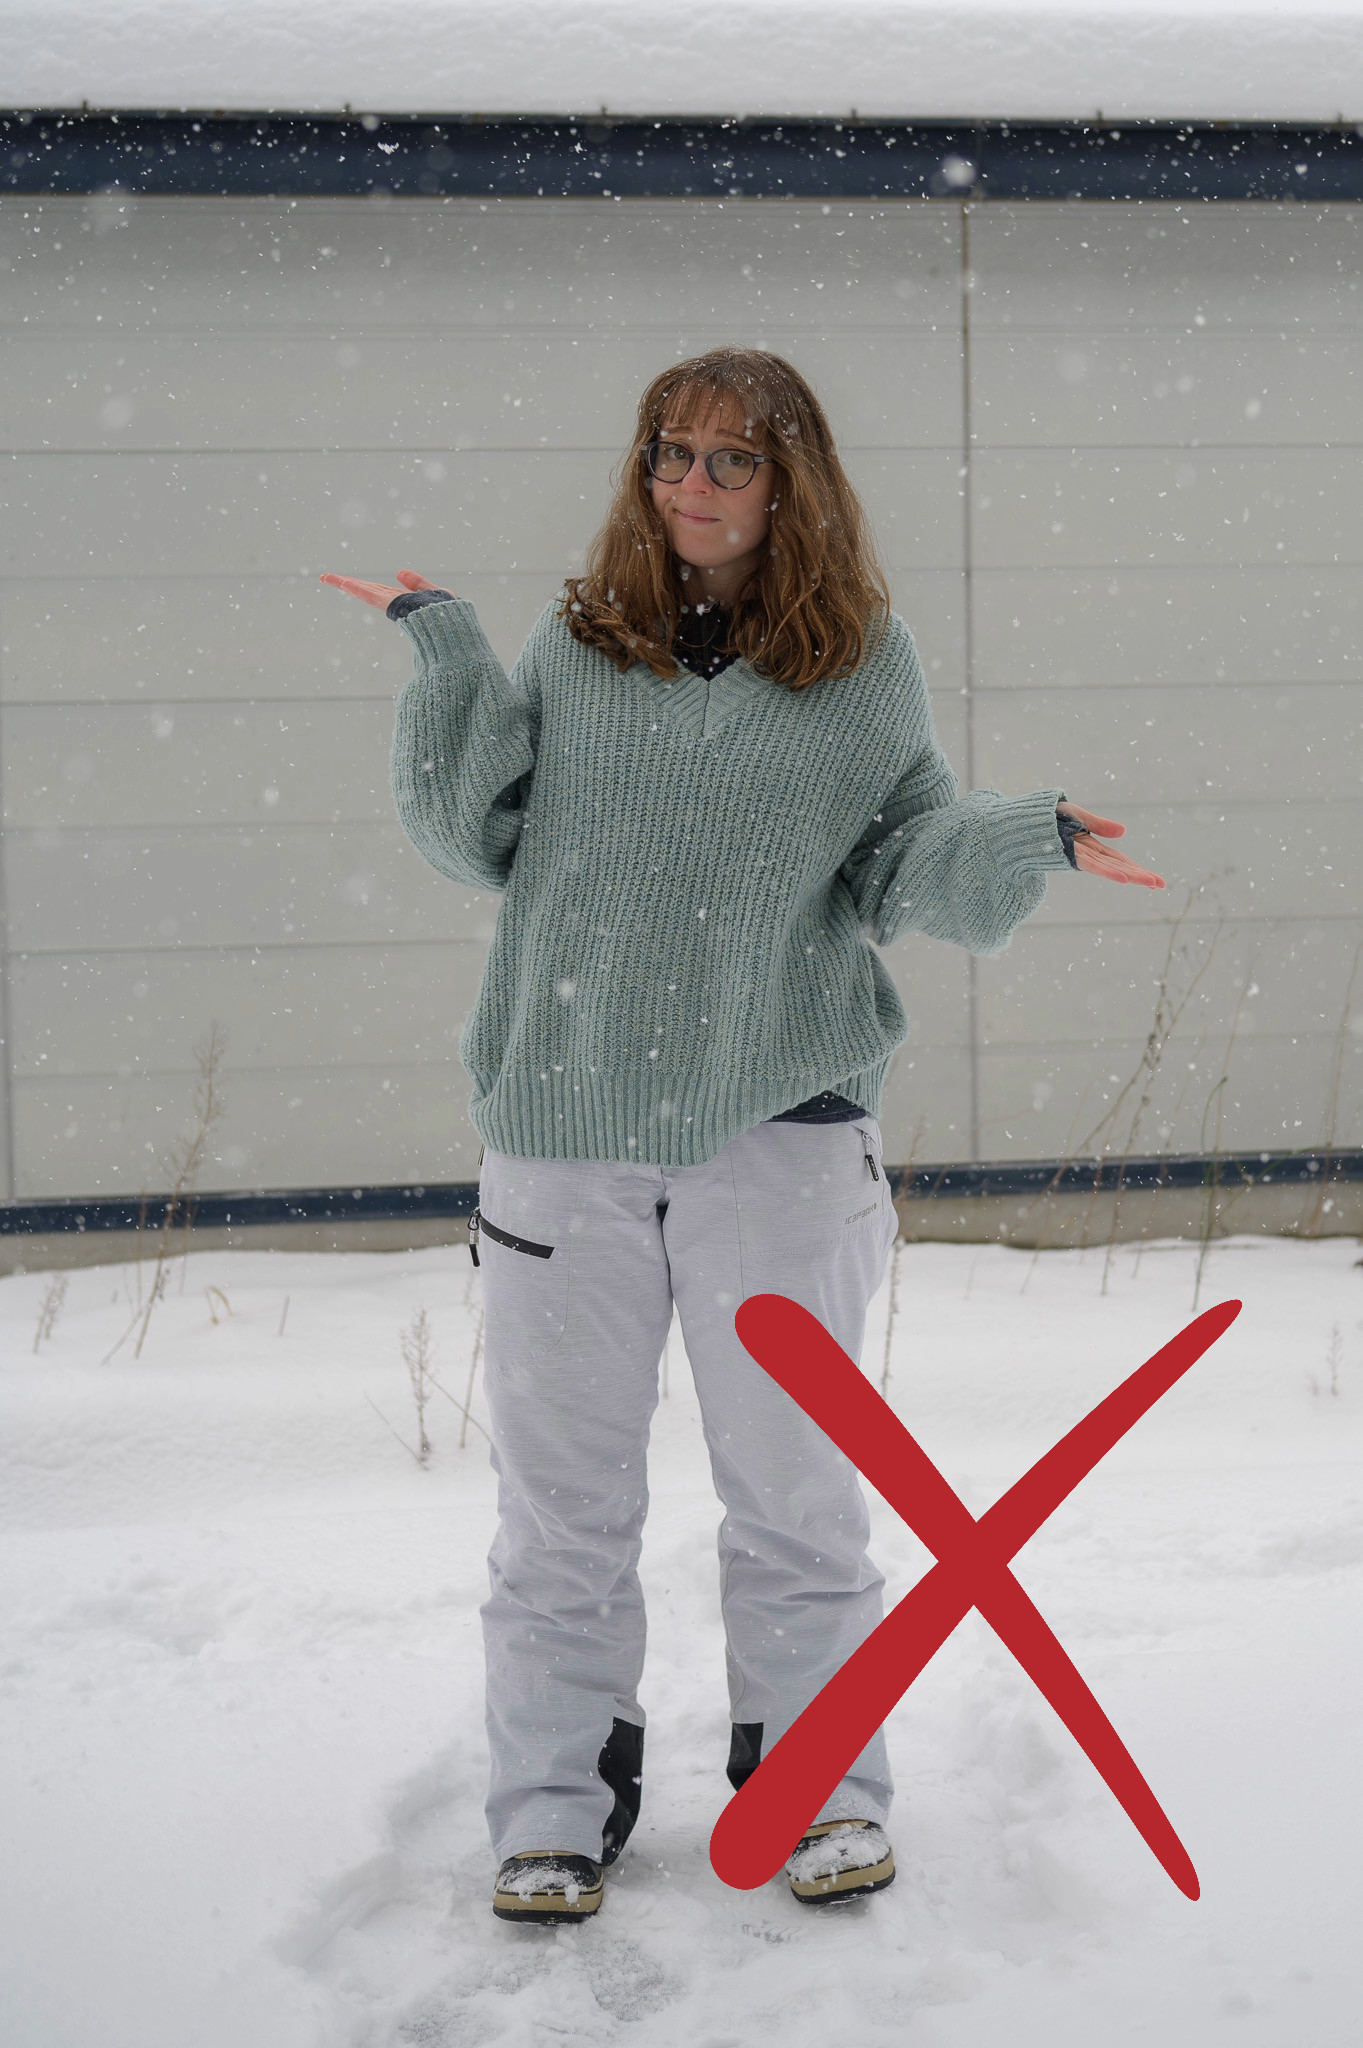 A girl wearing glasses stands in the snow wearing an oversize knitted jumper. She is shrugging.